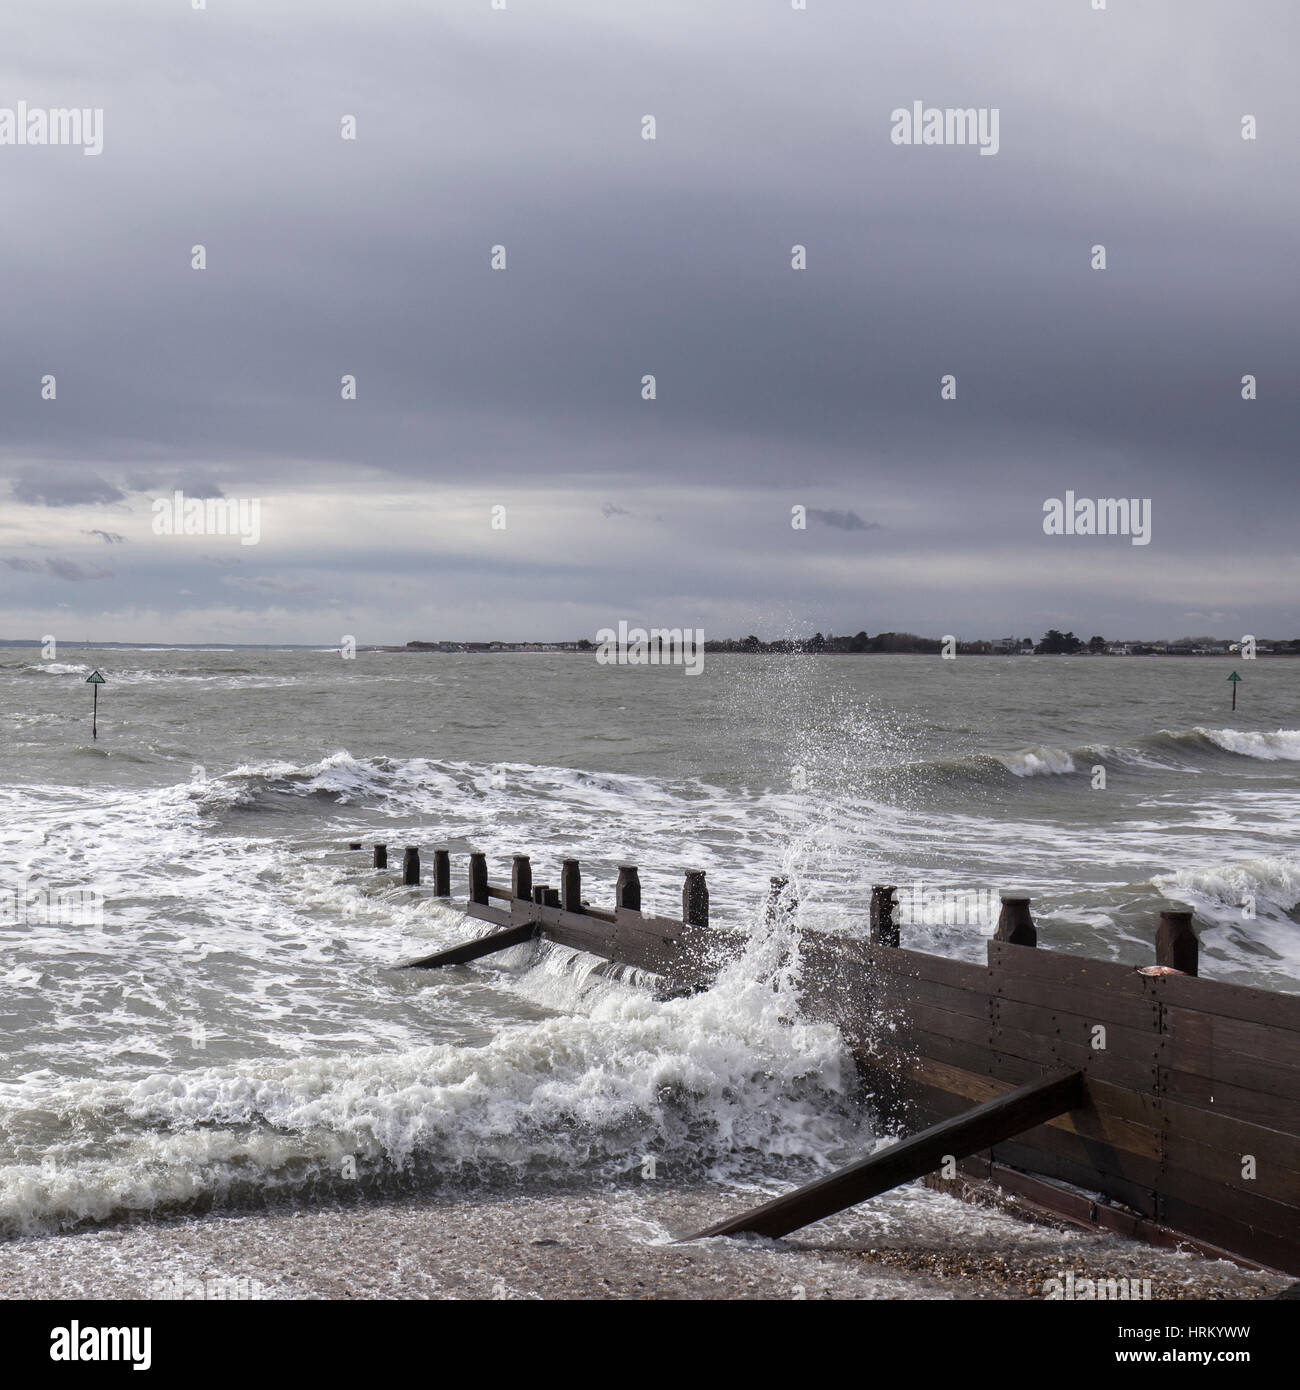 Square image of lively sea in West Wittering, Sussex, England Stock Photo